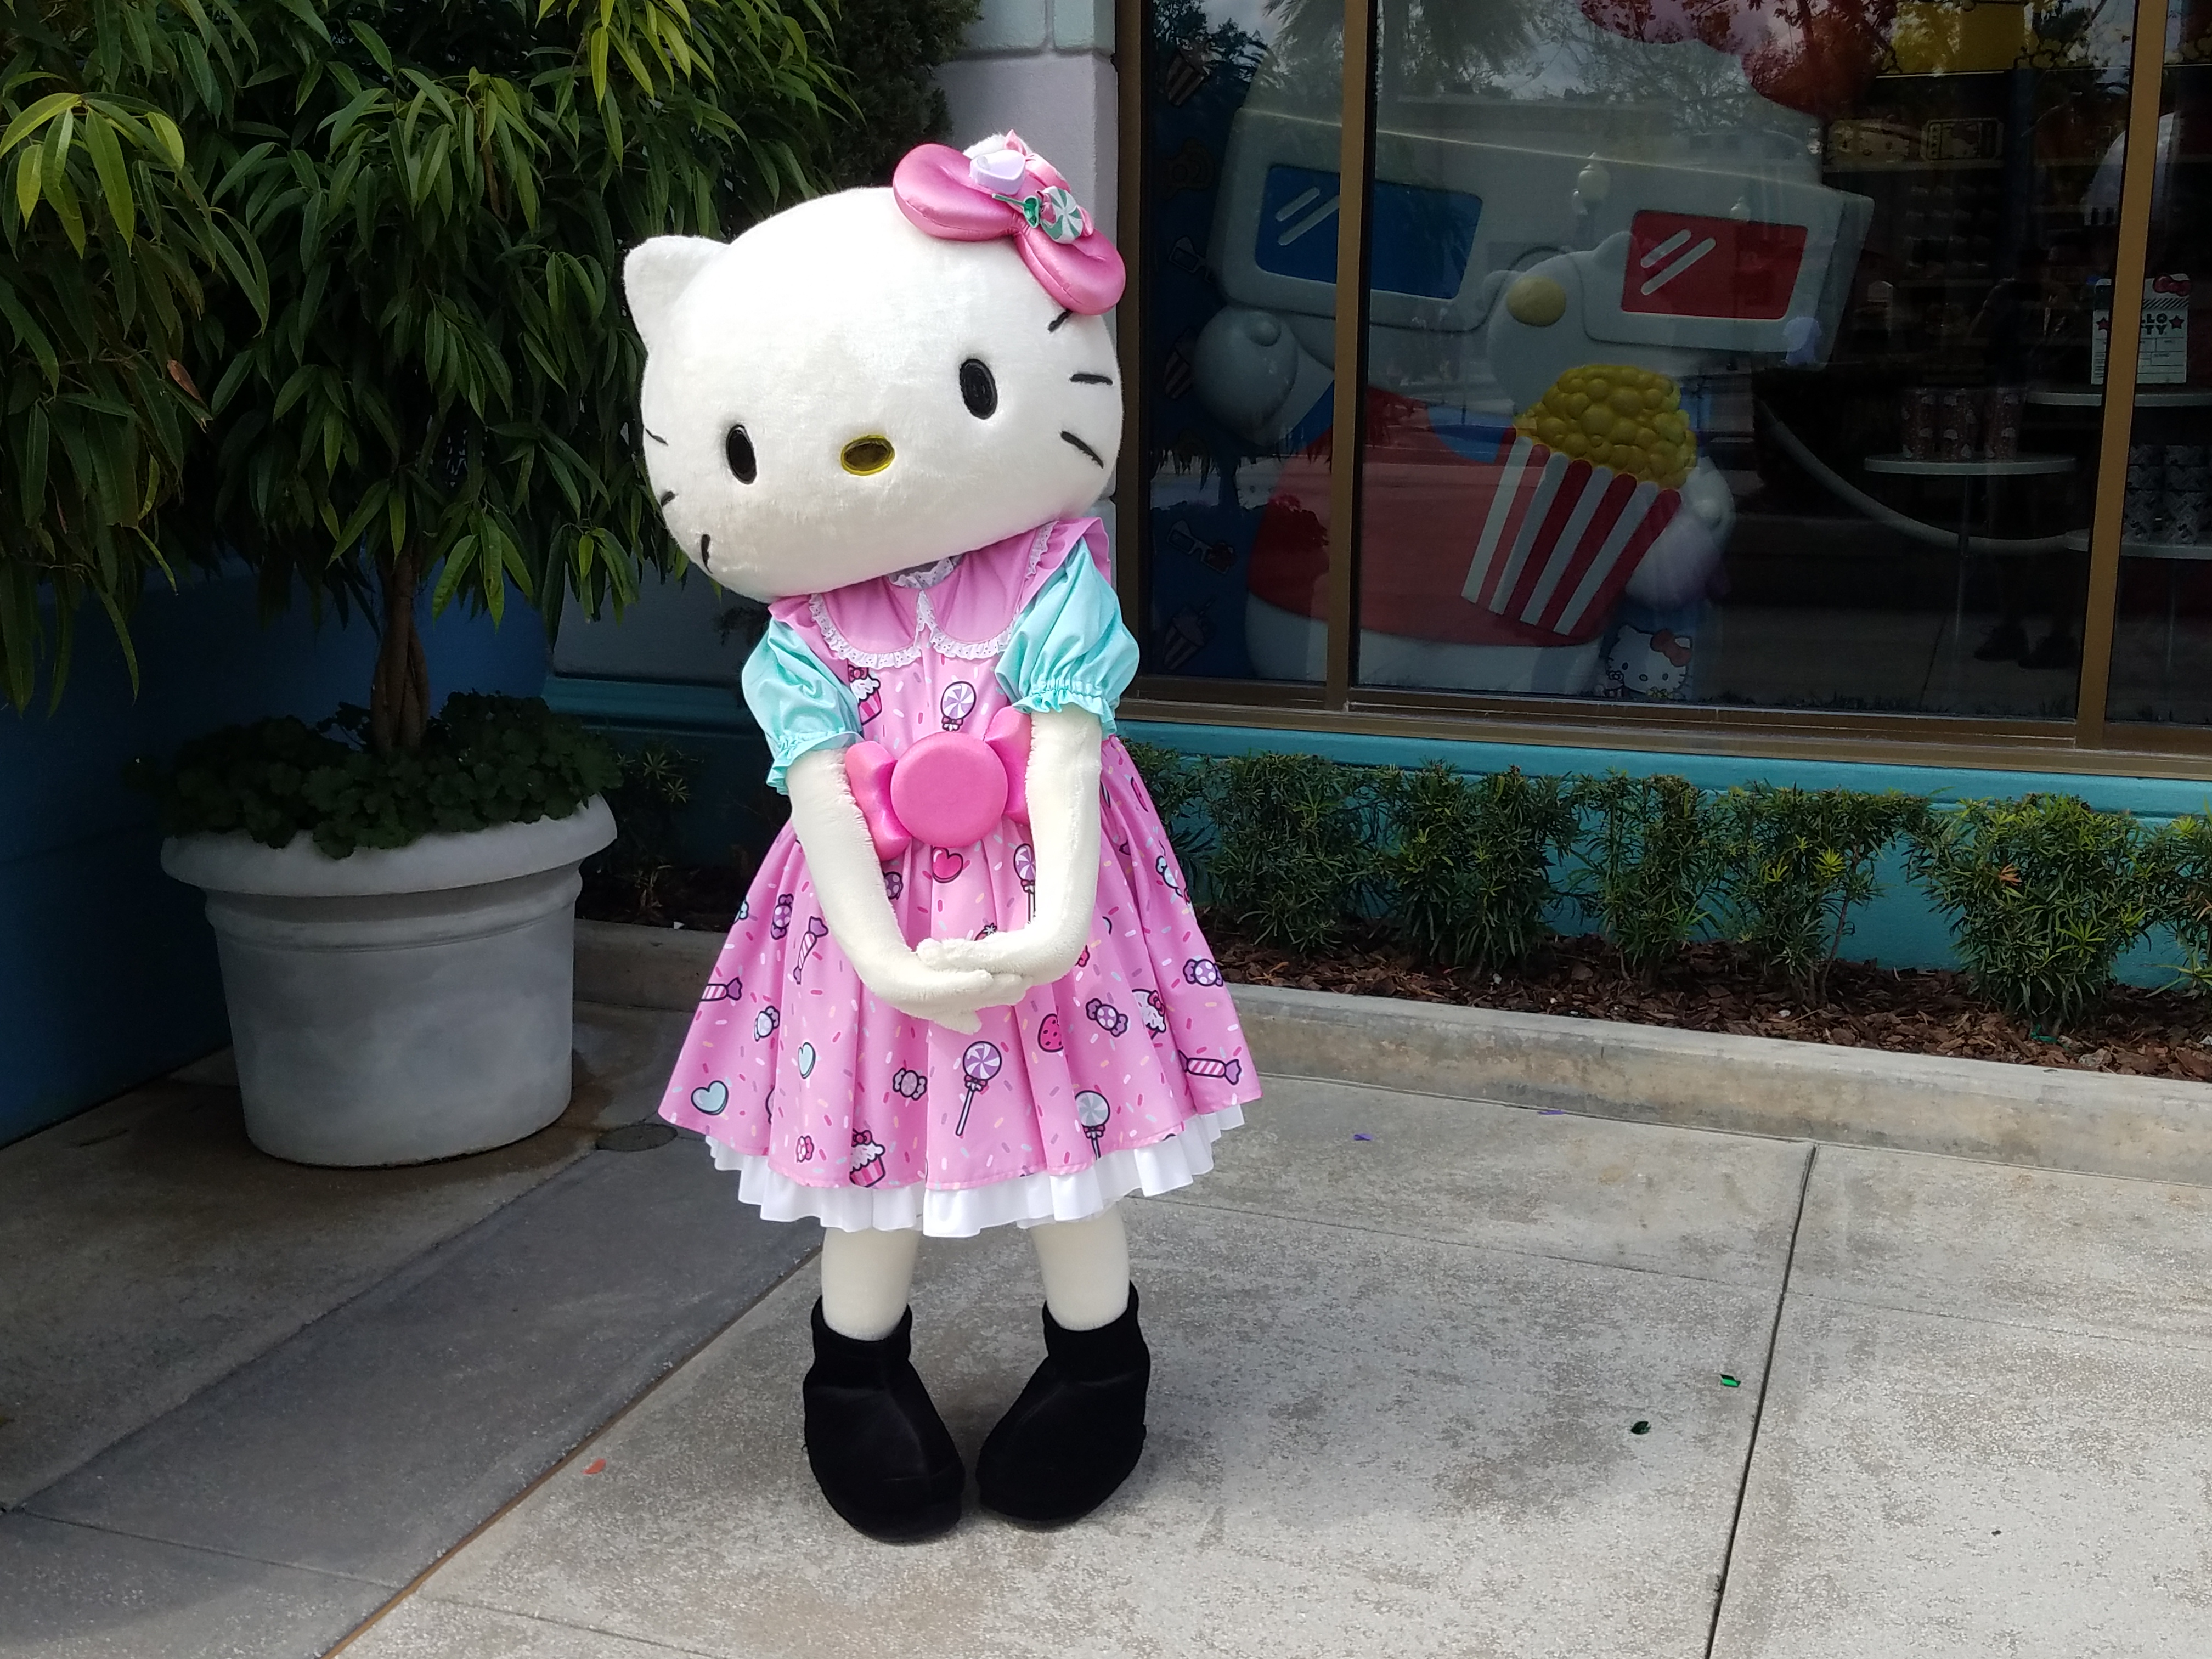 Hello Kitty at Universal Studios in Orlando, Florida - by unofficialuniversal.com.